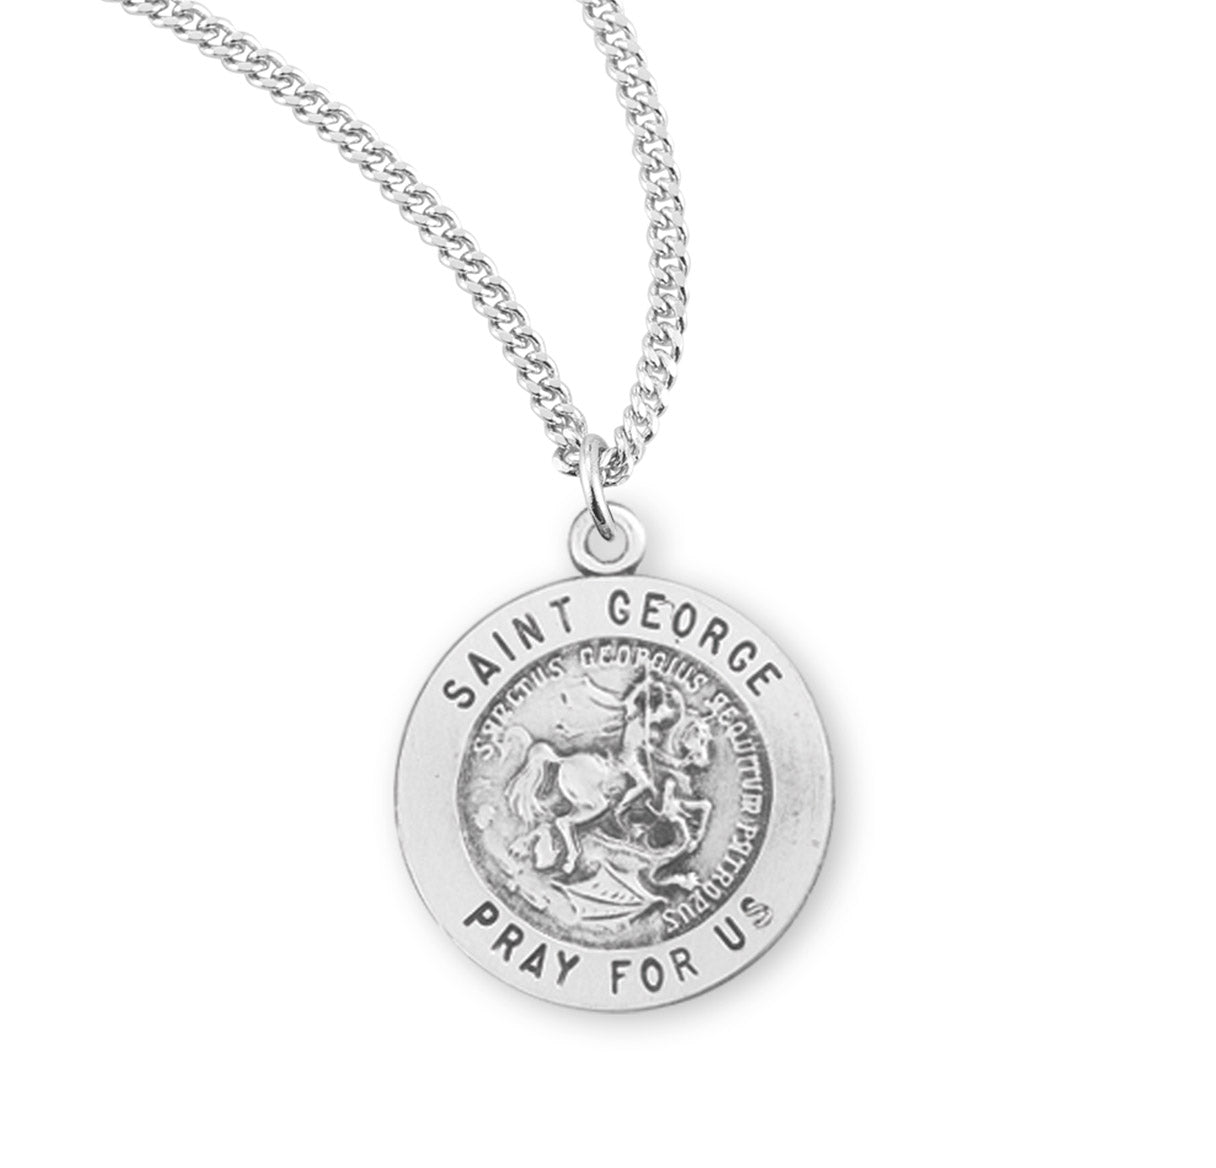 Patron Saint George Round Sterling Silver Medal